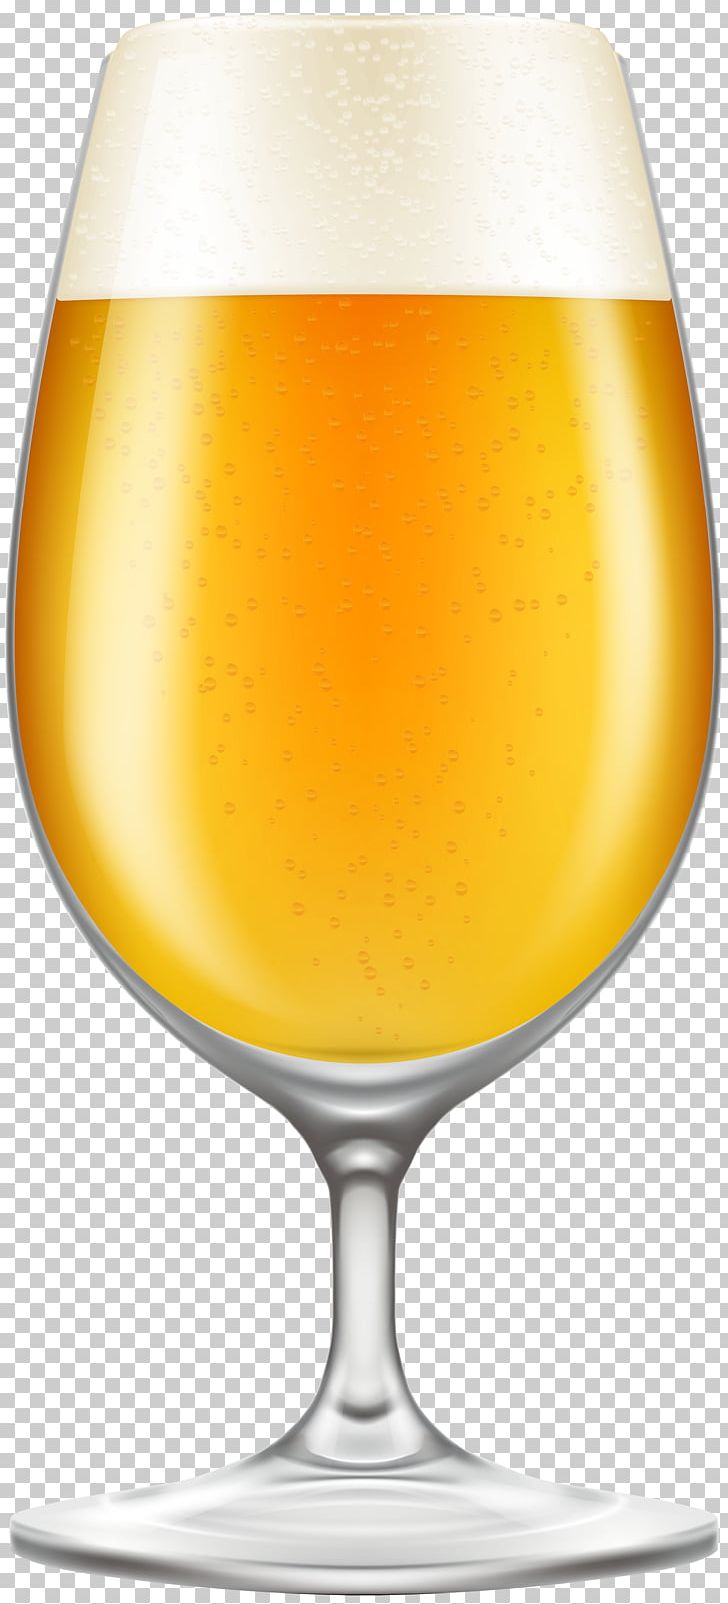 Beer Glasses Stout Drink Ale PNG, Clipart, Alcoholic Drink, Ale, Beer, Beer Glass, Beer Glasses Free PNG Download